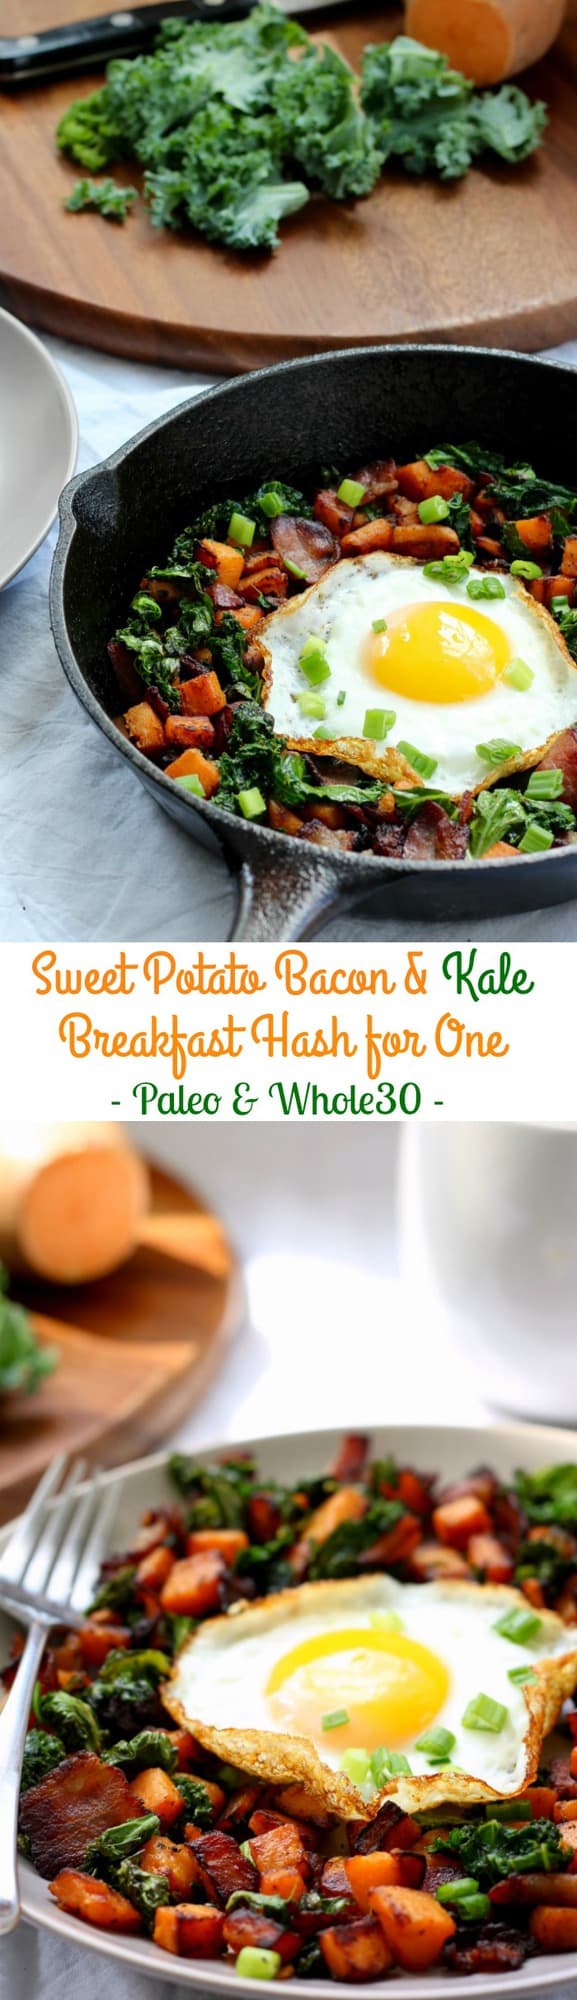 Sweet Potato Bacon and Kale breakfast Hash for one - Paleo and Whole30, grain free, dairy free